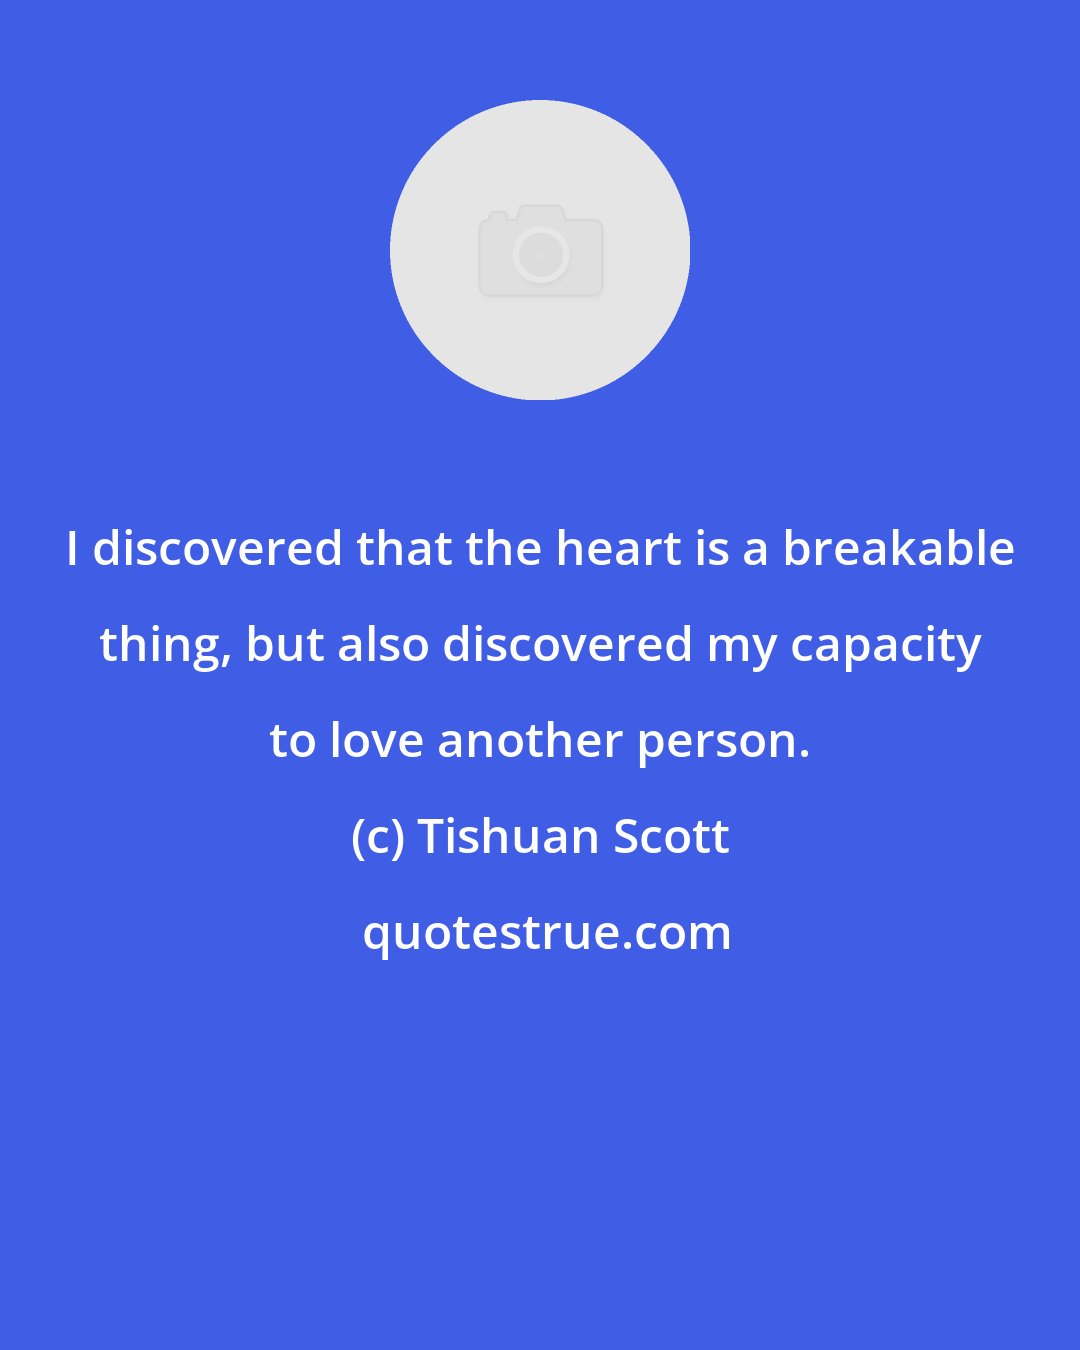 Tishuan Scott: I discovered that the heart is a breakable thing, but also discovered my capacity to love another person.